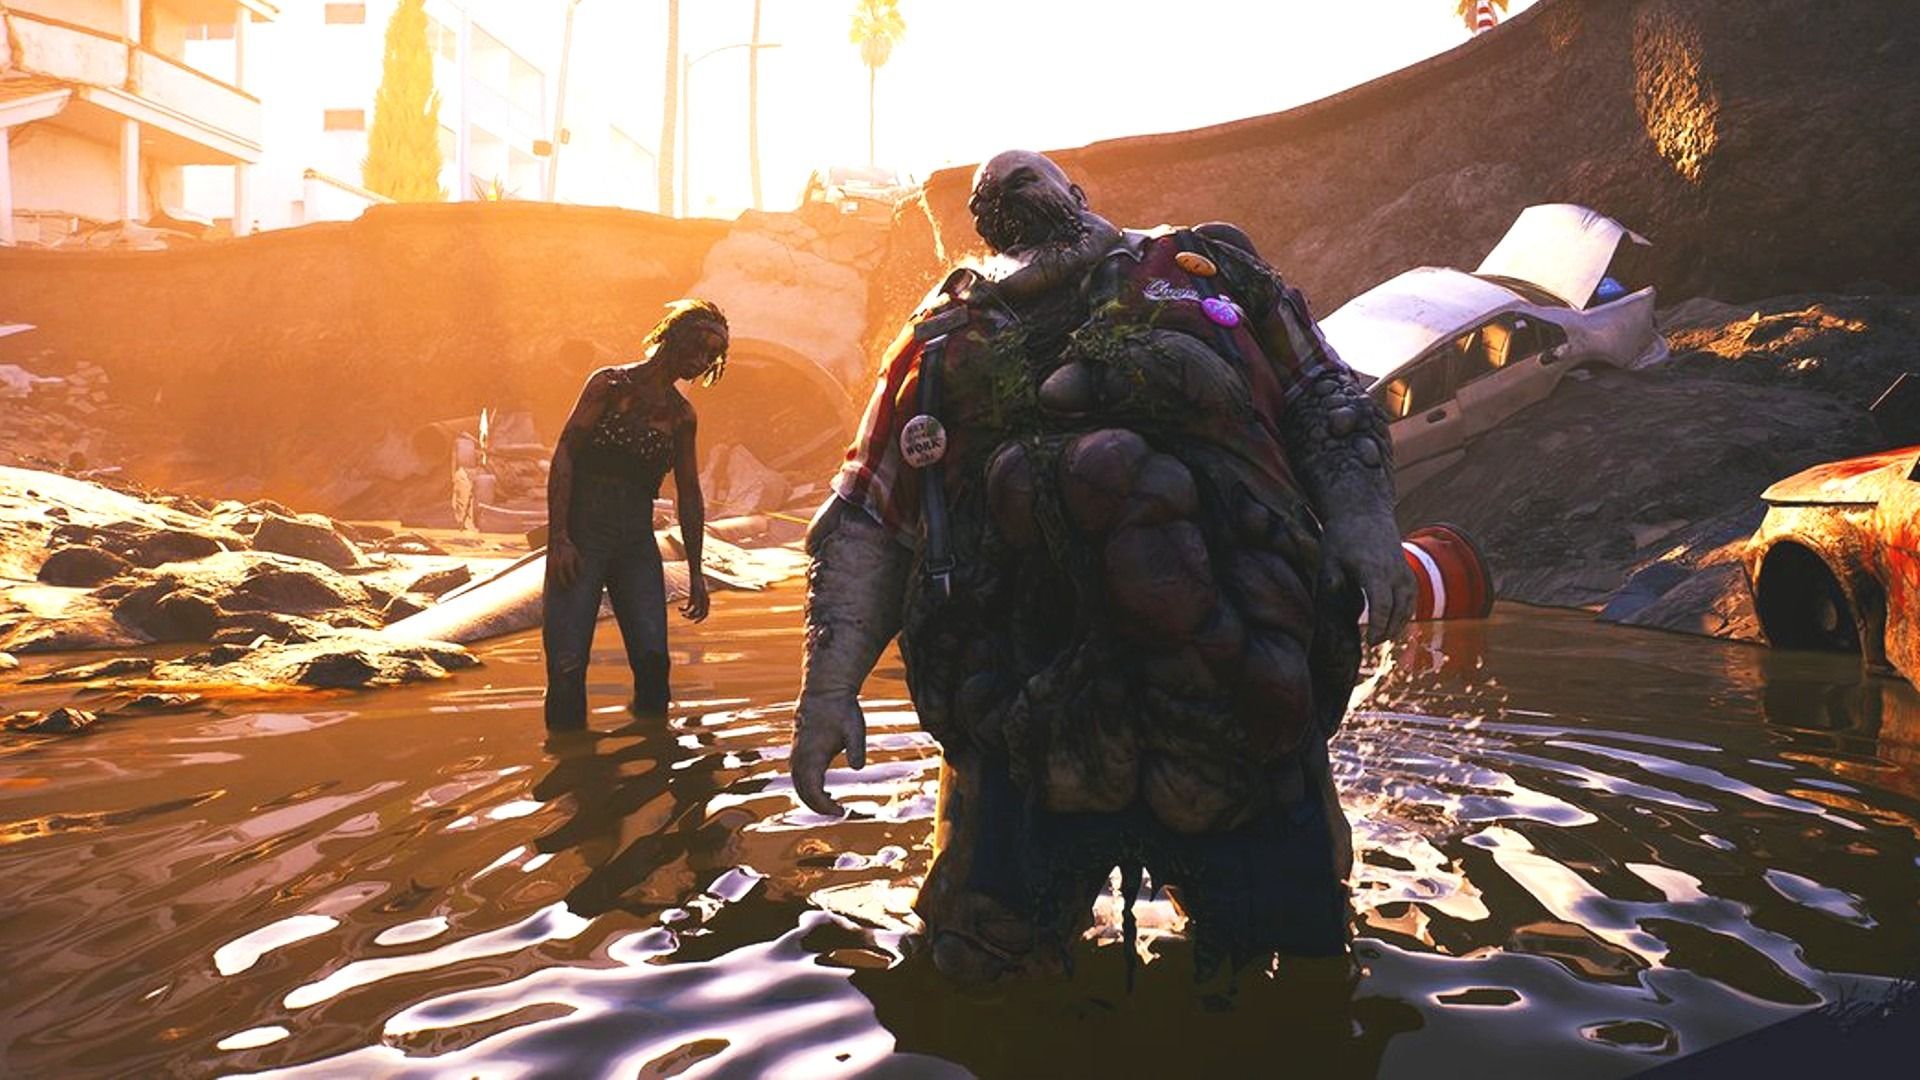 Dead Island 2 Mutated Hearts: How to Farm Efficiently - Gameplay - Getting  Started, Dead Island 2